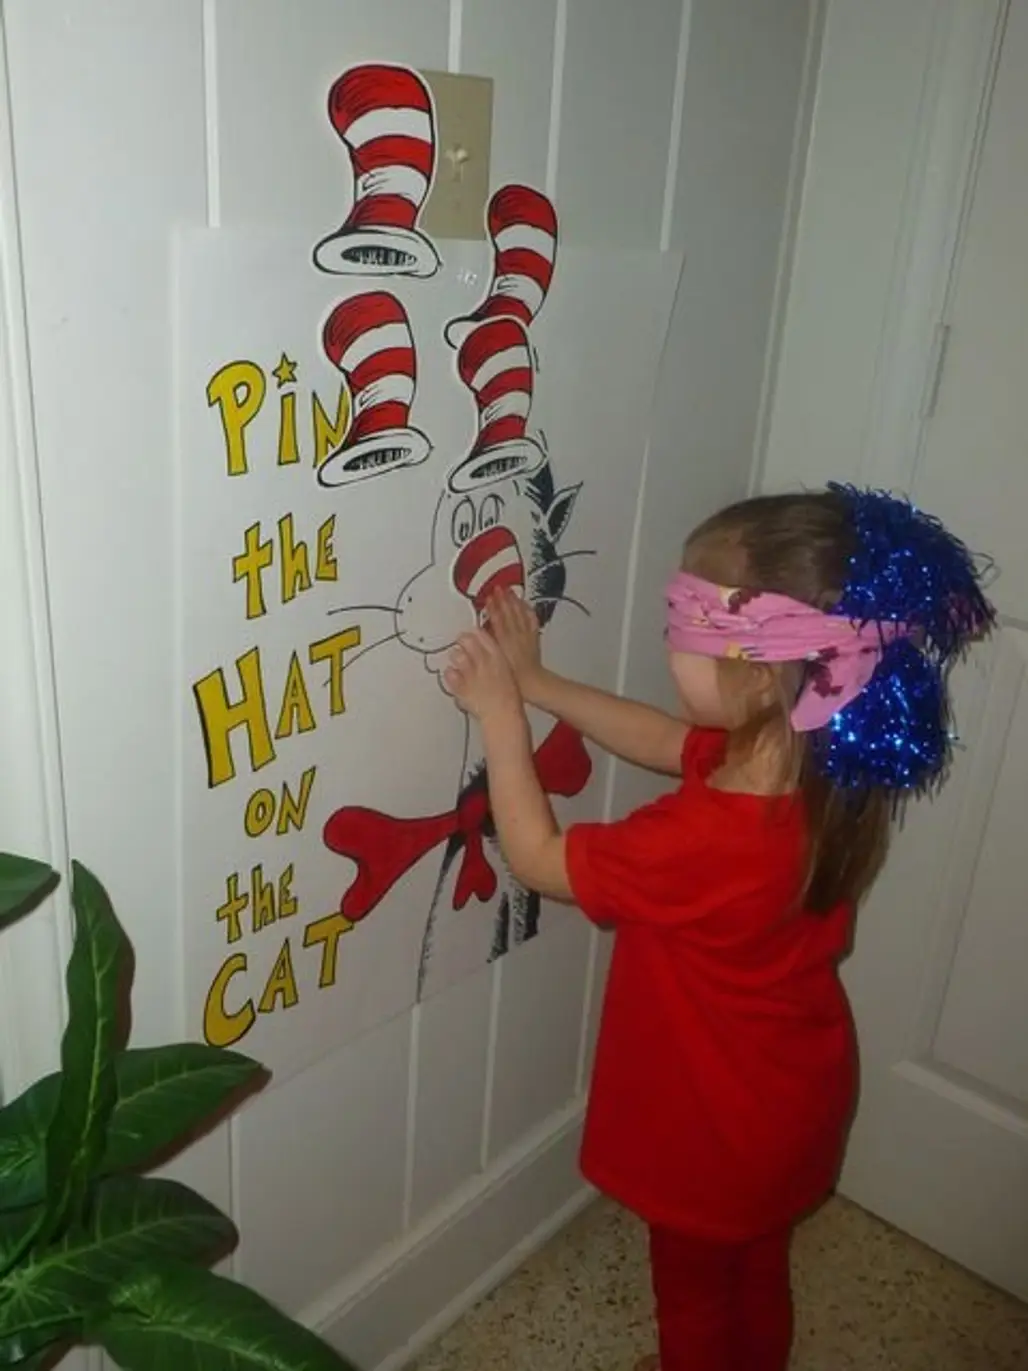 Pin the Hat on the Cat